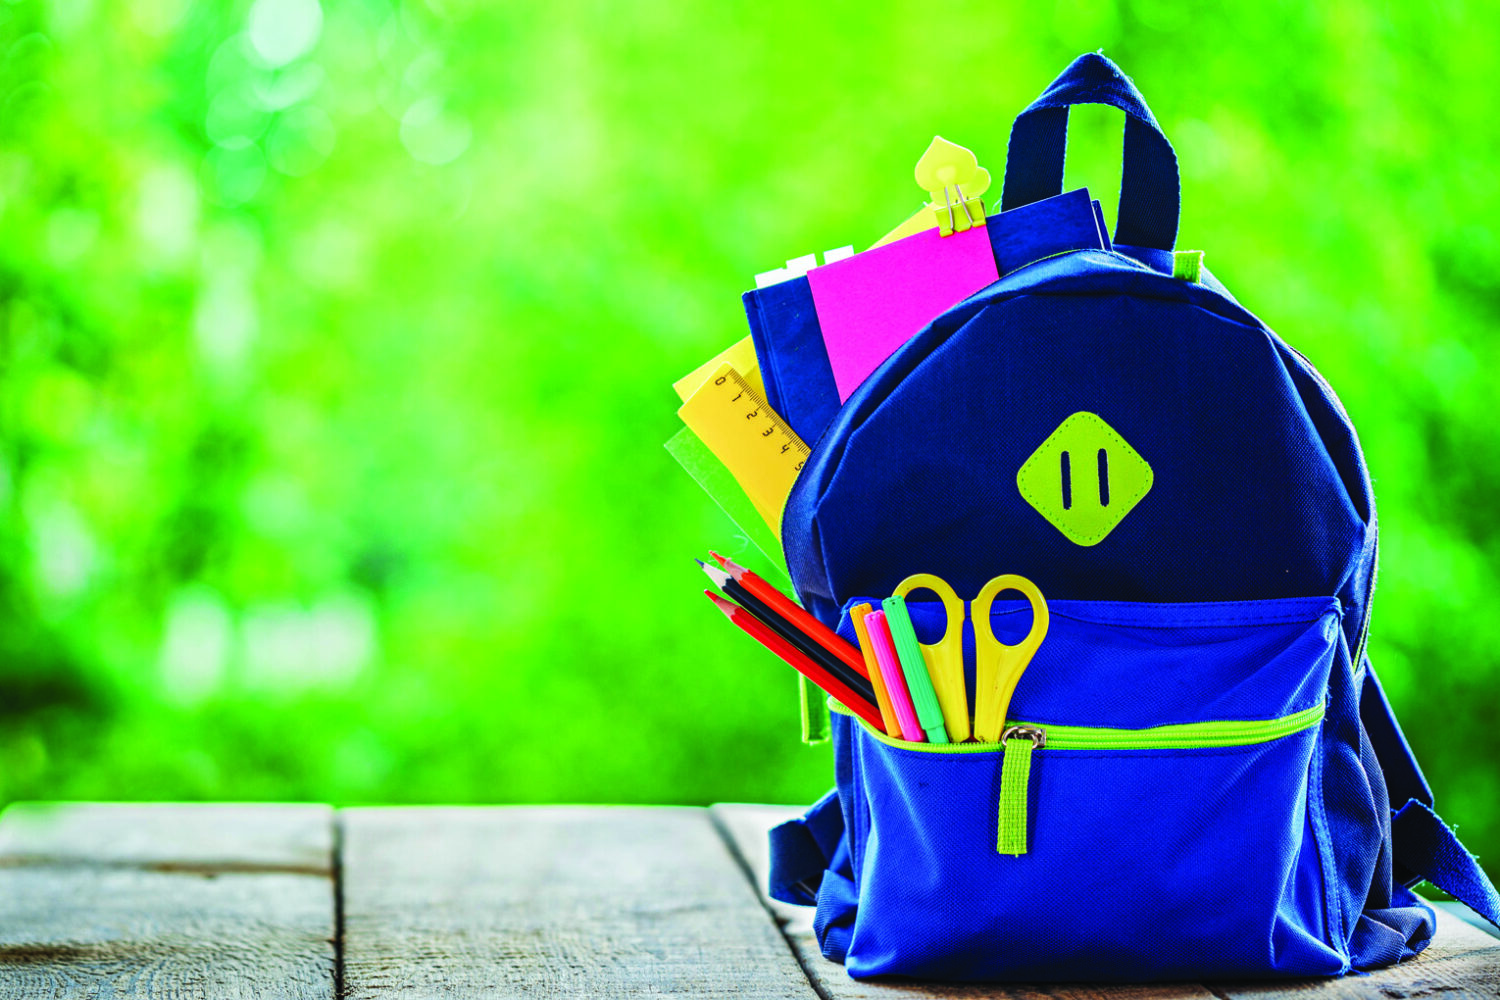 Merrill’s Backpacks and School Supplies Drive is under way